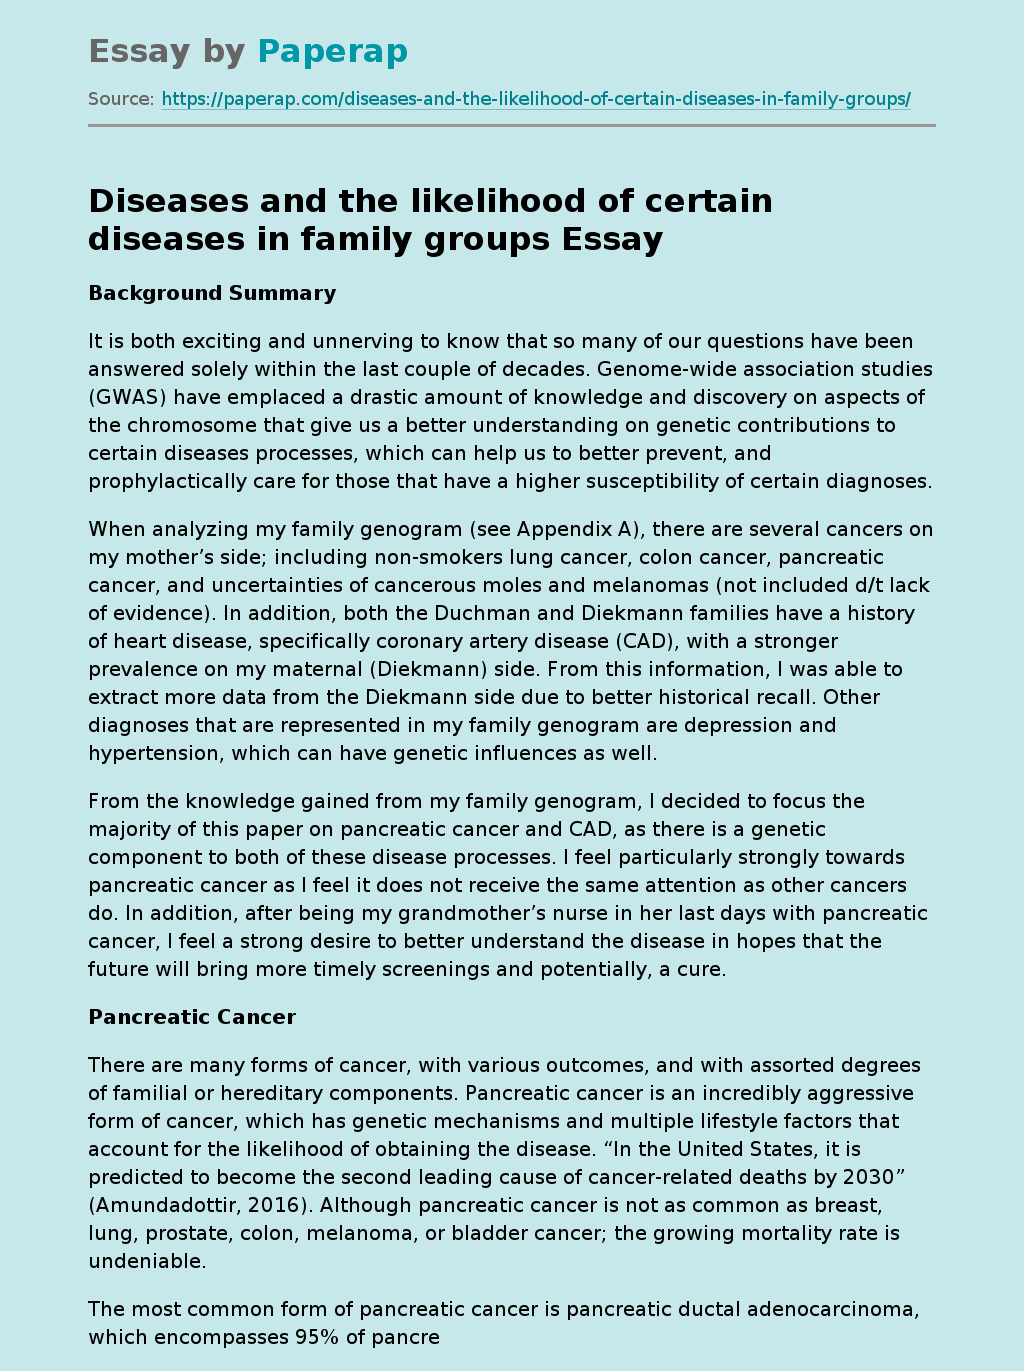 Diseases and the likelihood of certain diseases in family groups